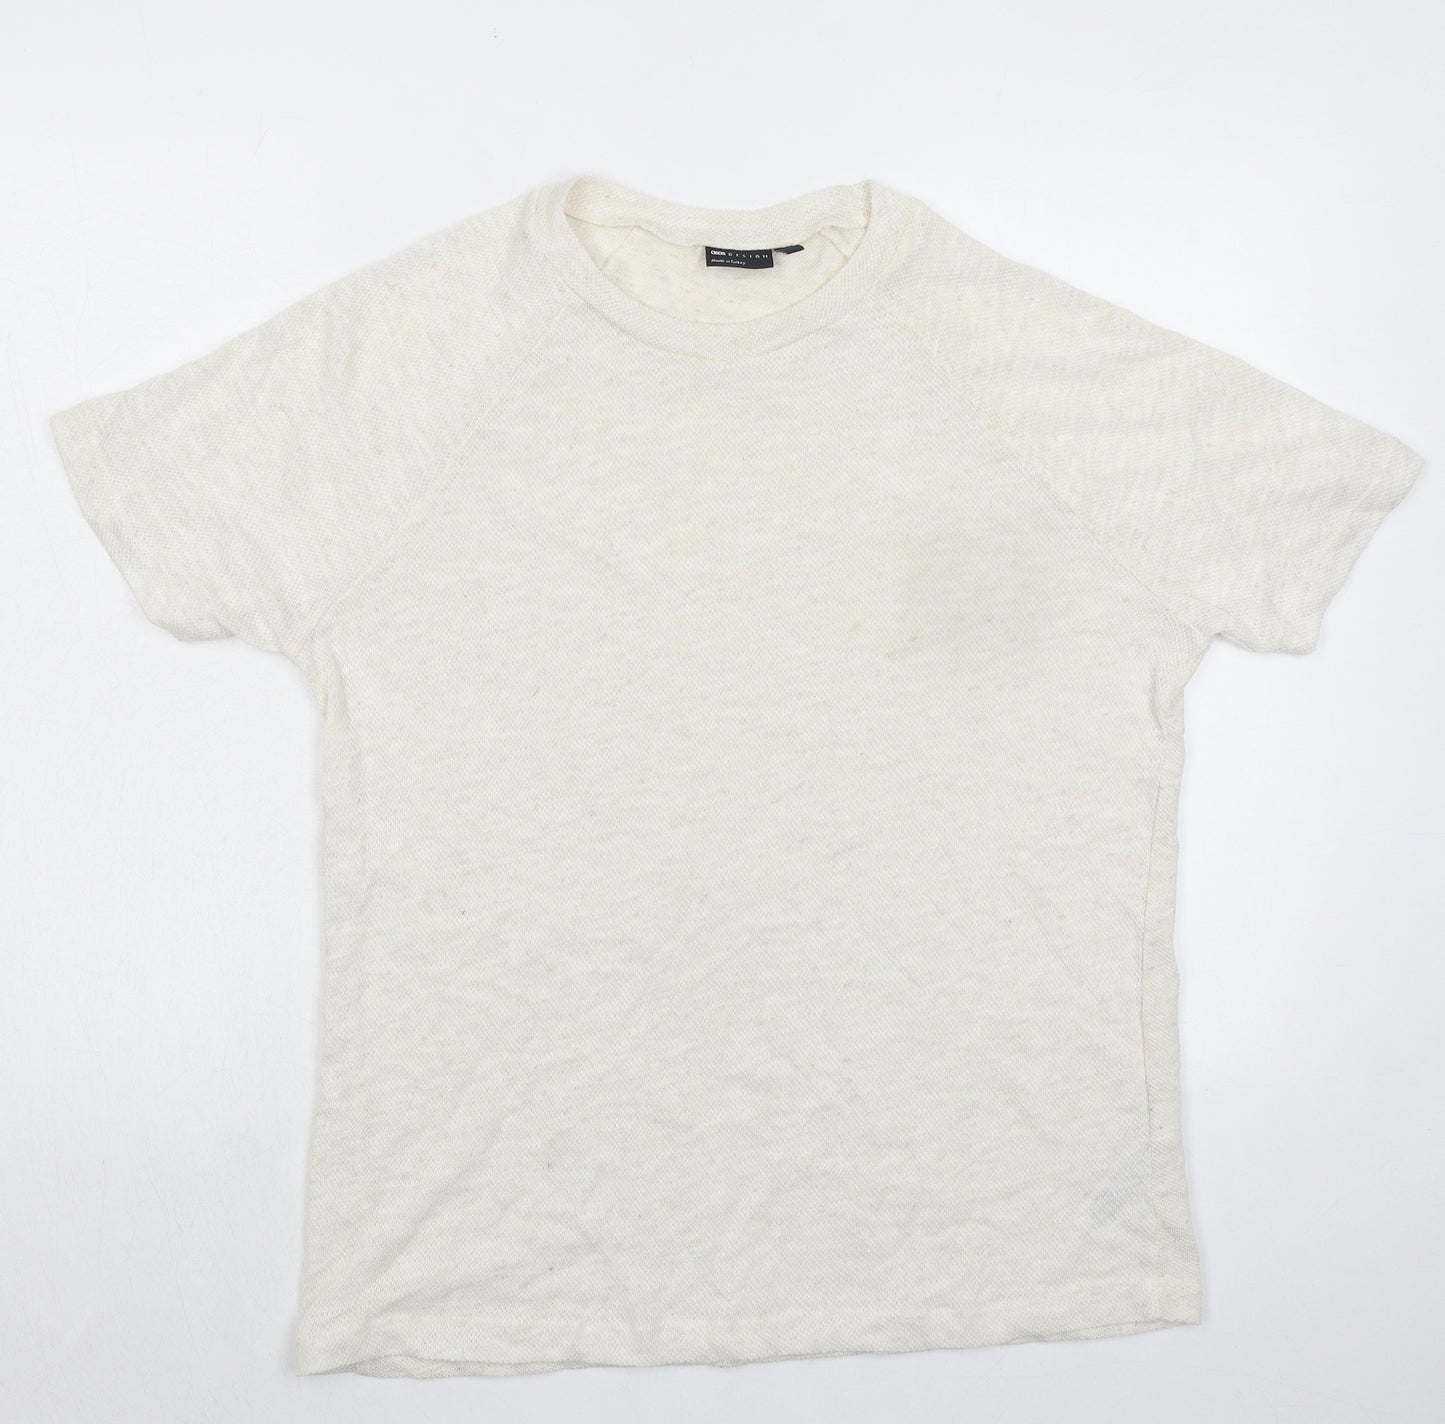 ASOS Mens Ivory Polyester T-Shirt Size S Crew Neck